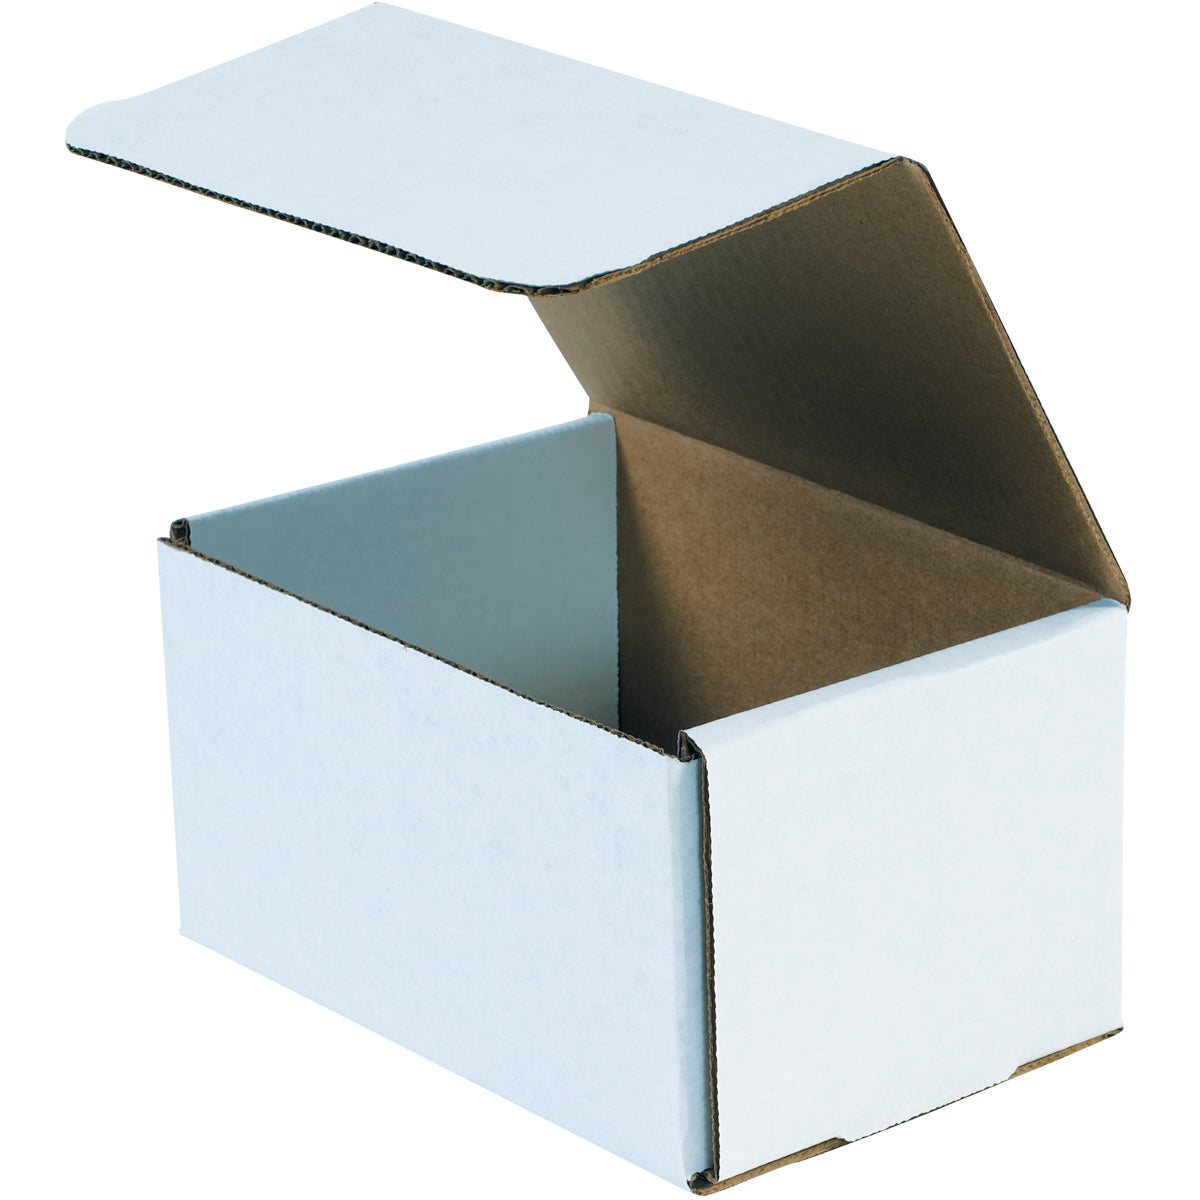 USPS Size Corrugated Tote Bin for Bulk Collection Box - 6-Pack